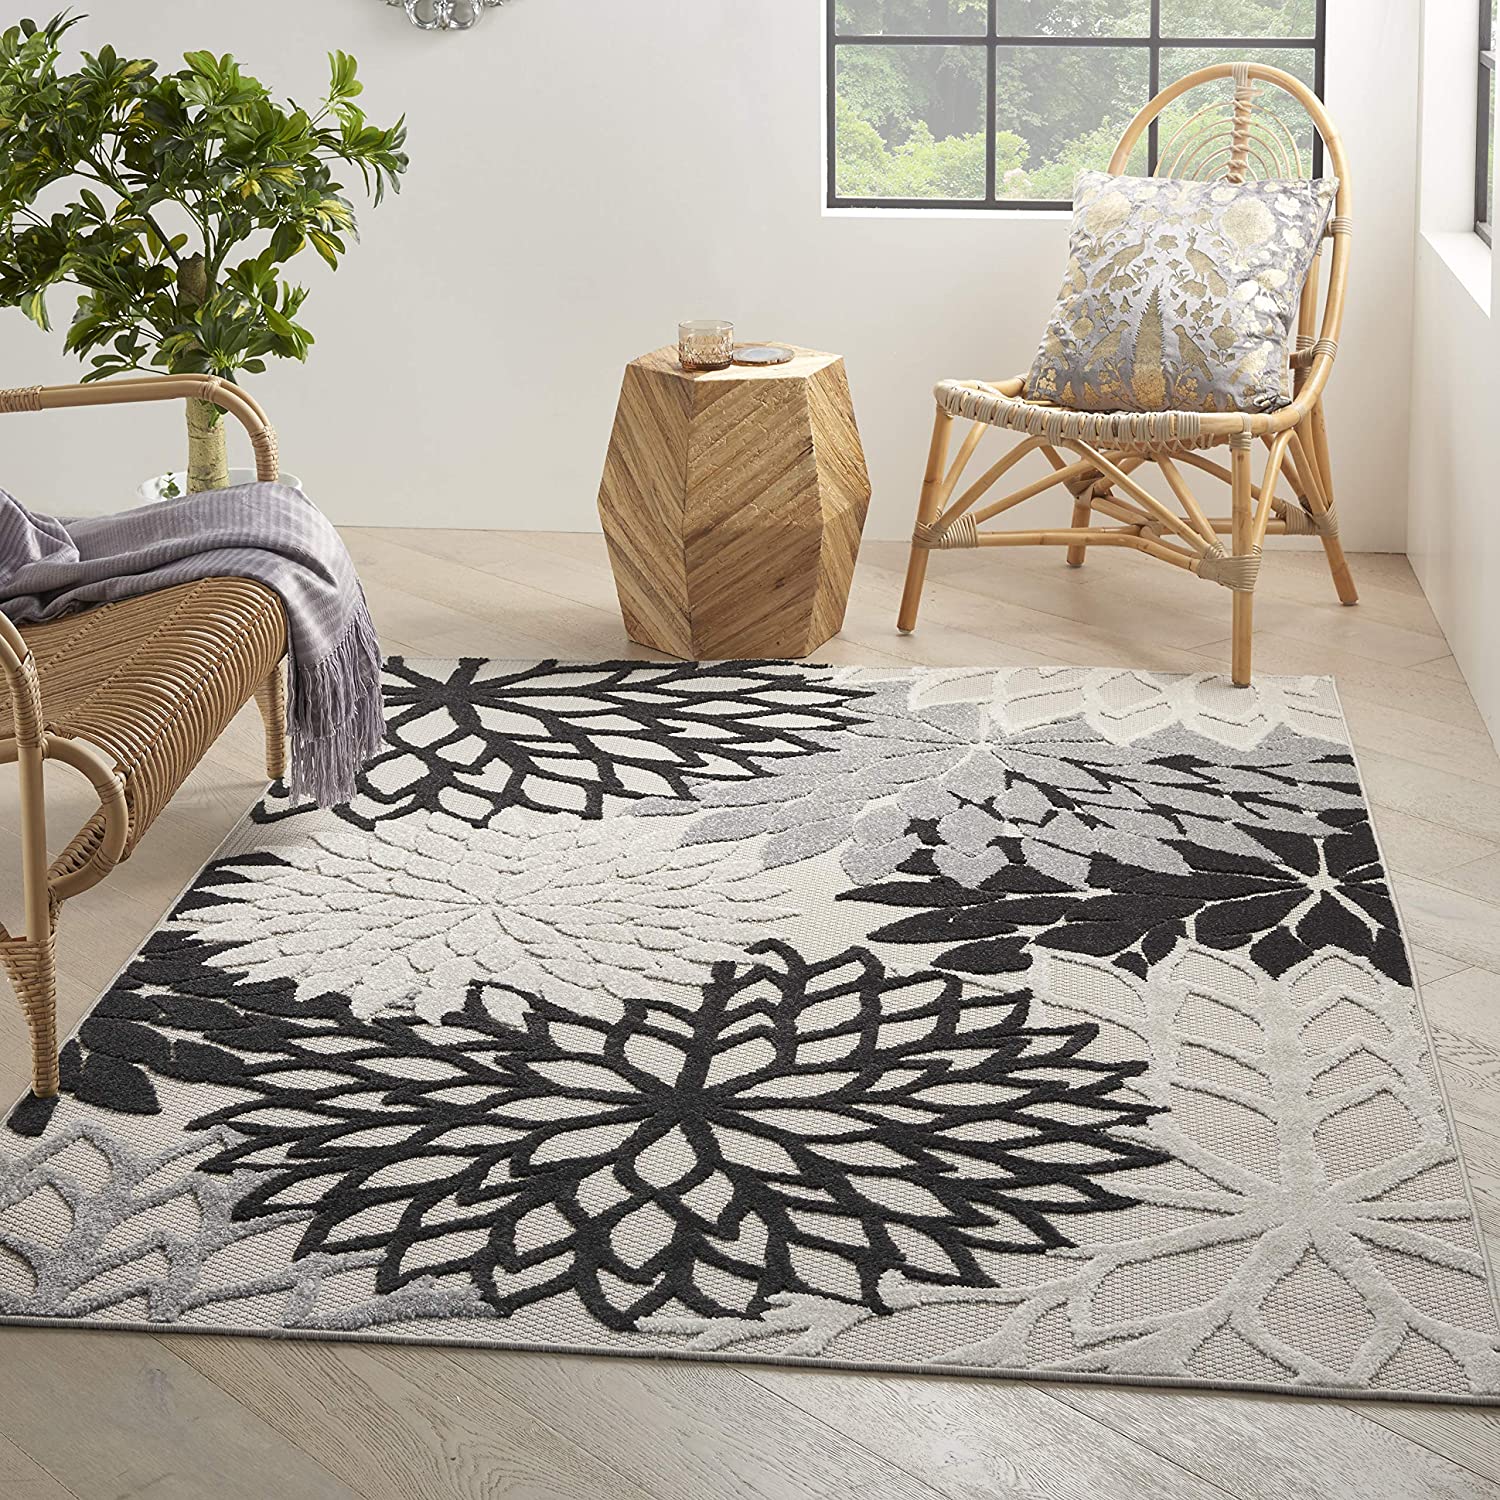 Aloha Indoor/Outdoor Floral Black White Area Rug – Modern Rugs and